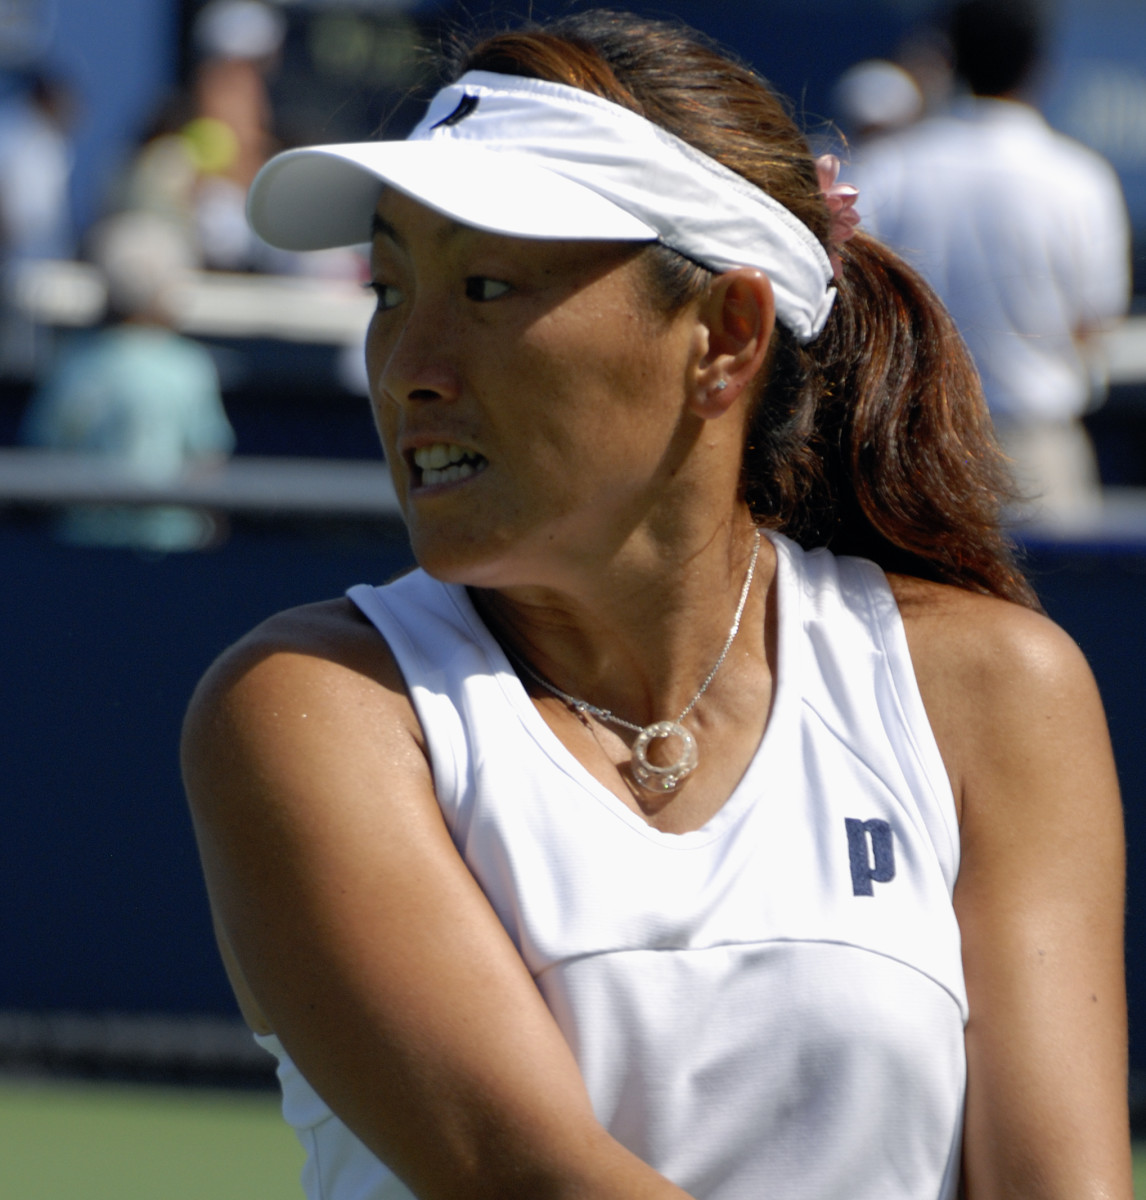 a-tribute-to-ai-sugiyama-famous-japanese-tennis-player